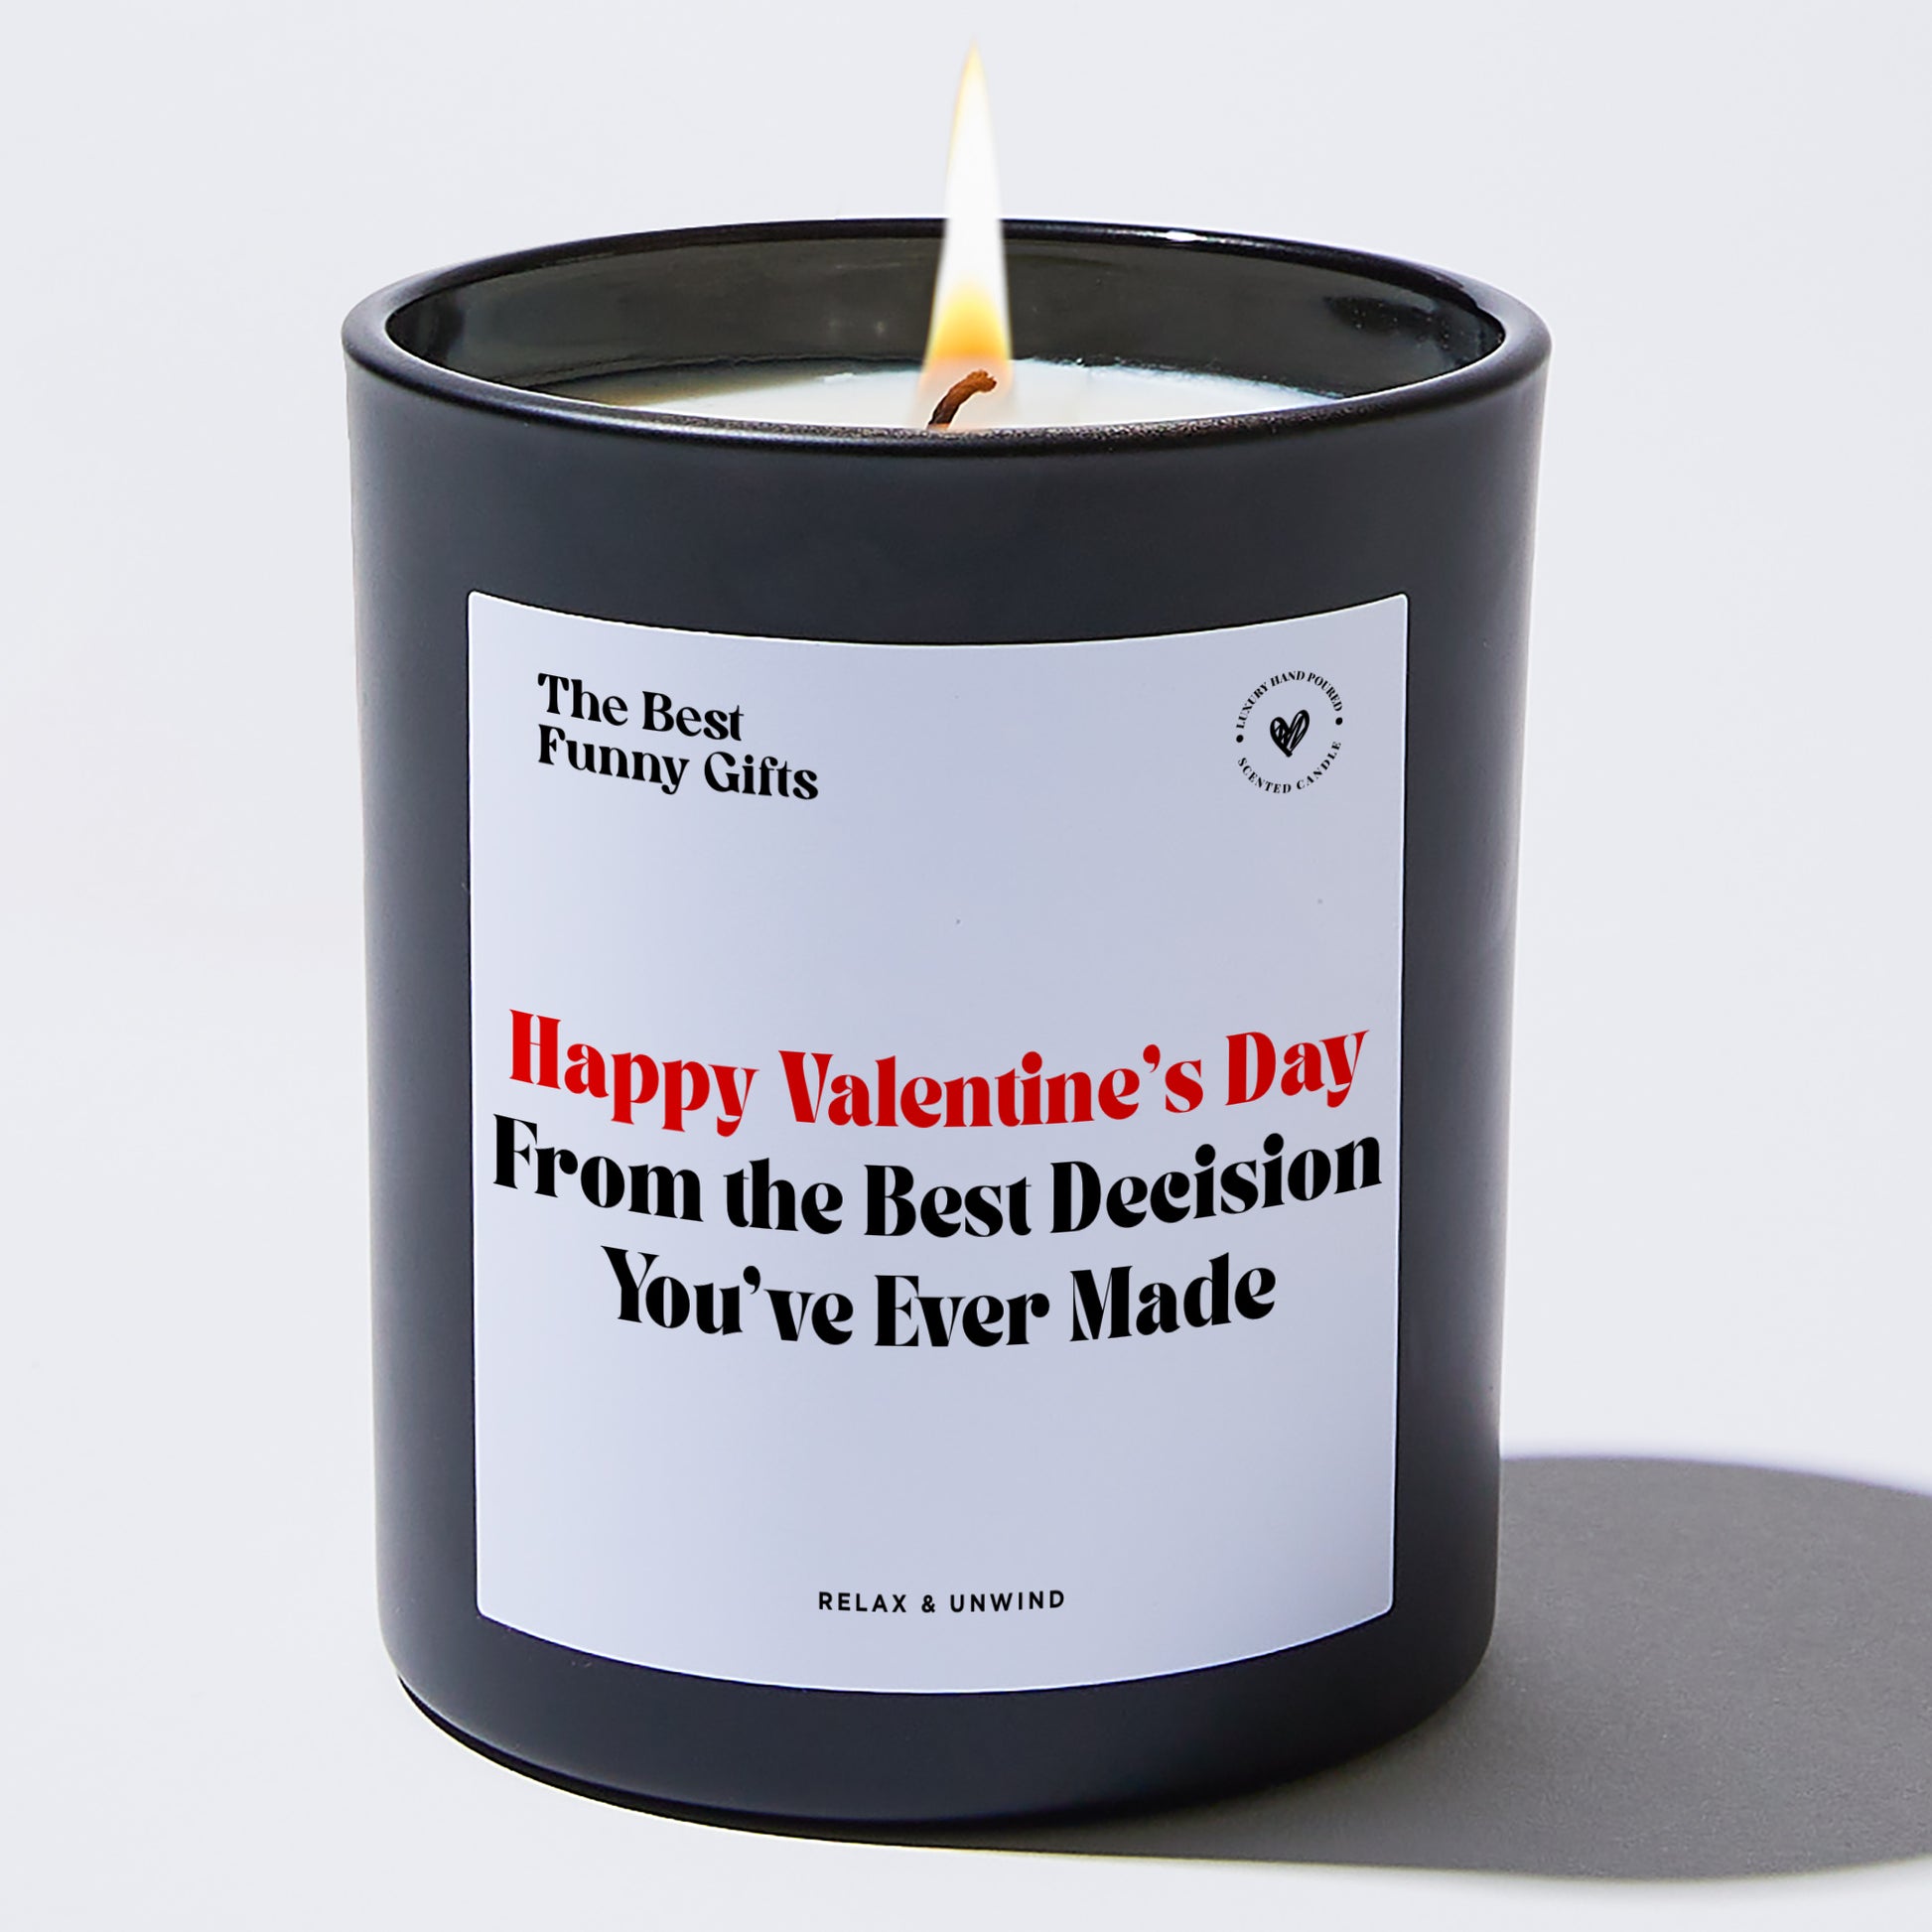 Anniversary Happy Valentine's Day From the Best Decision You've Ever Made - The Best Funny Gifts